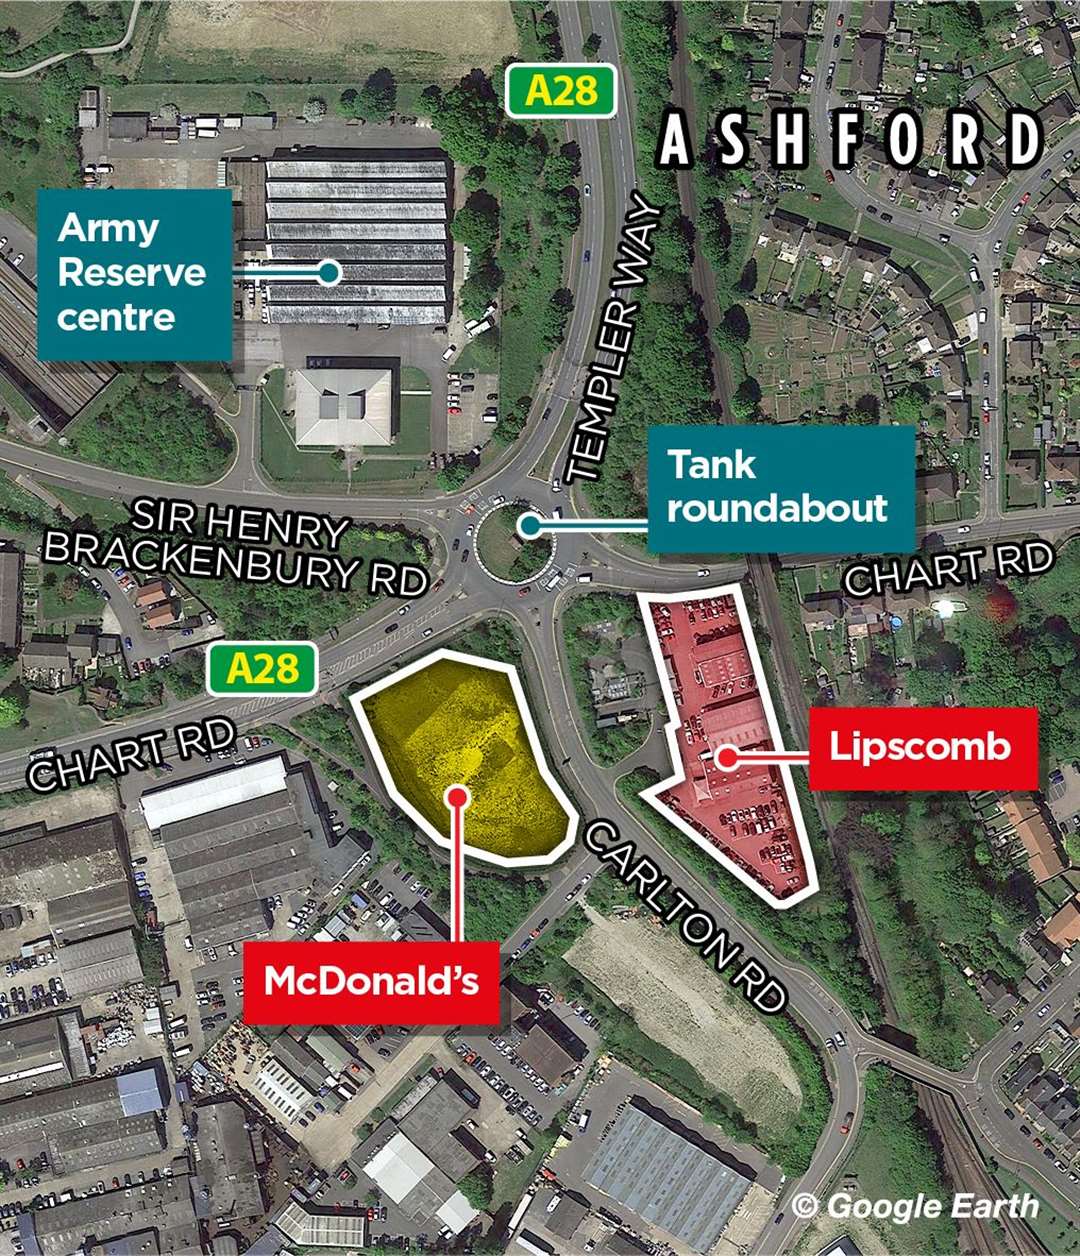 Ashford's fourth McDonald's is set to be built next to the former Lipscomb site